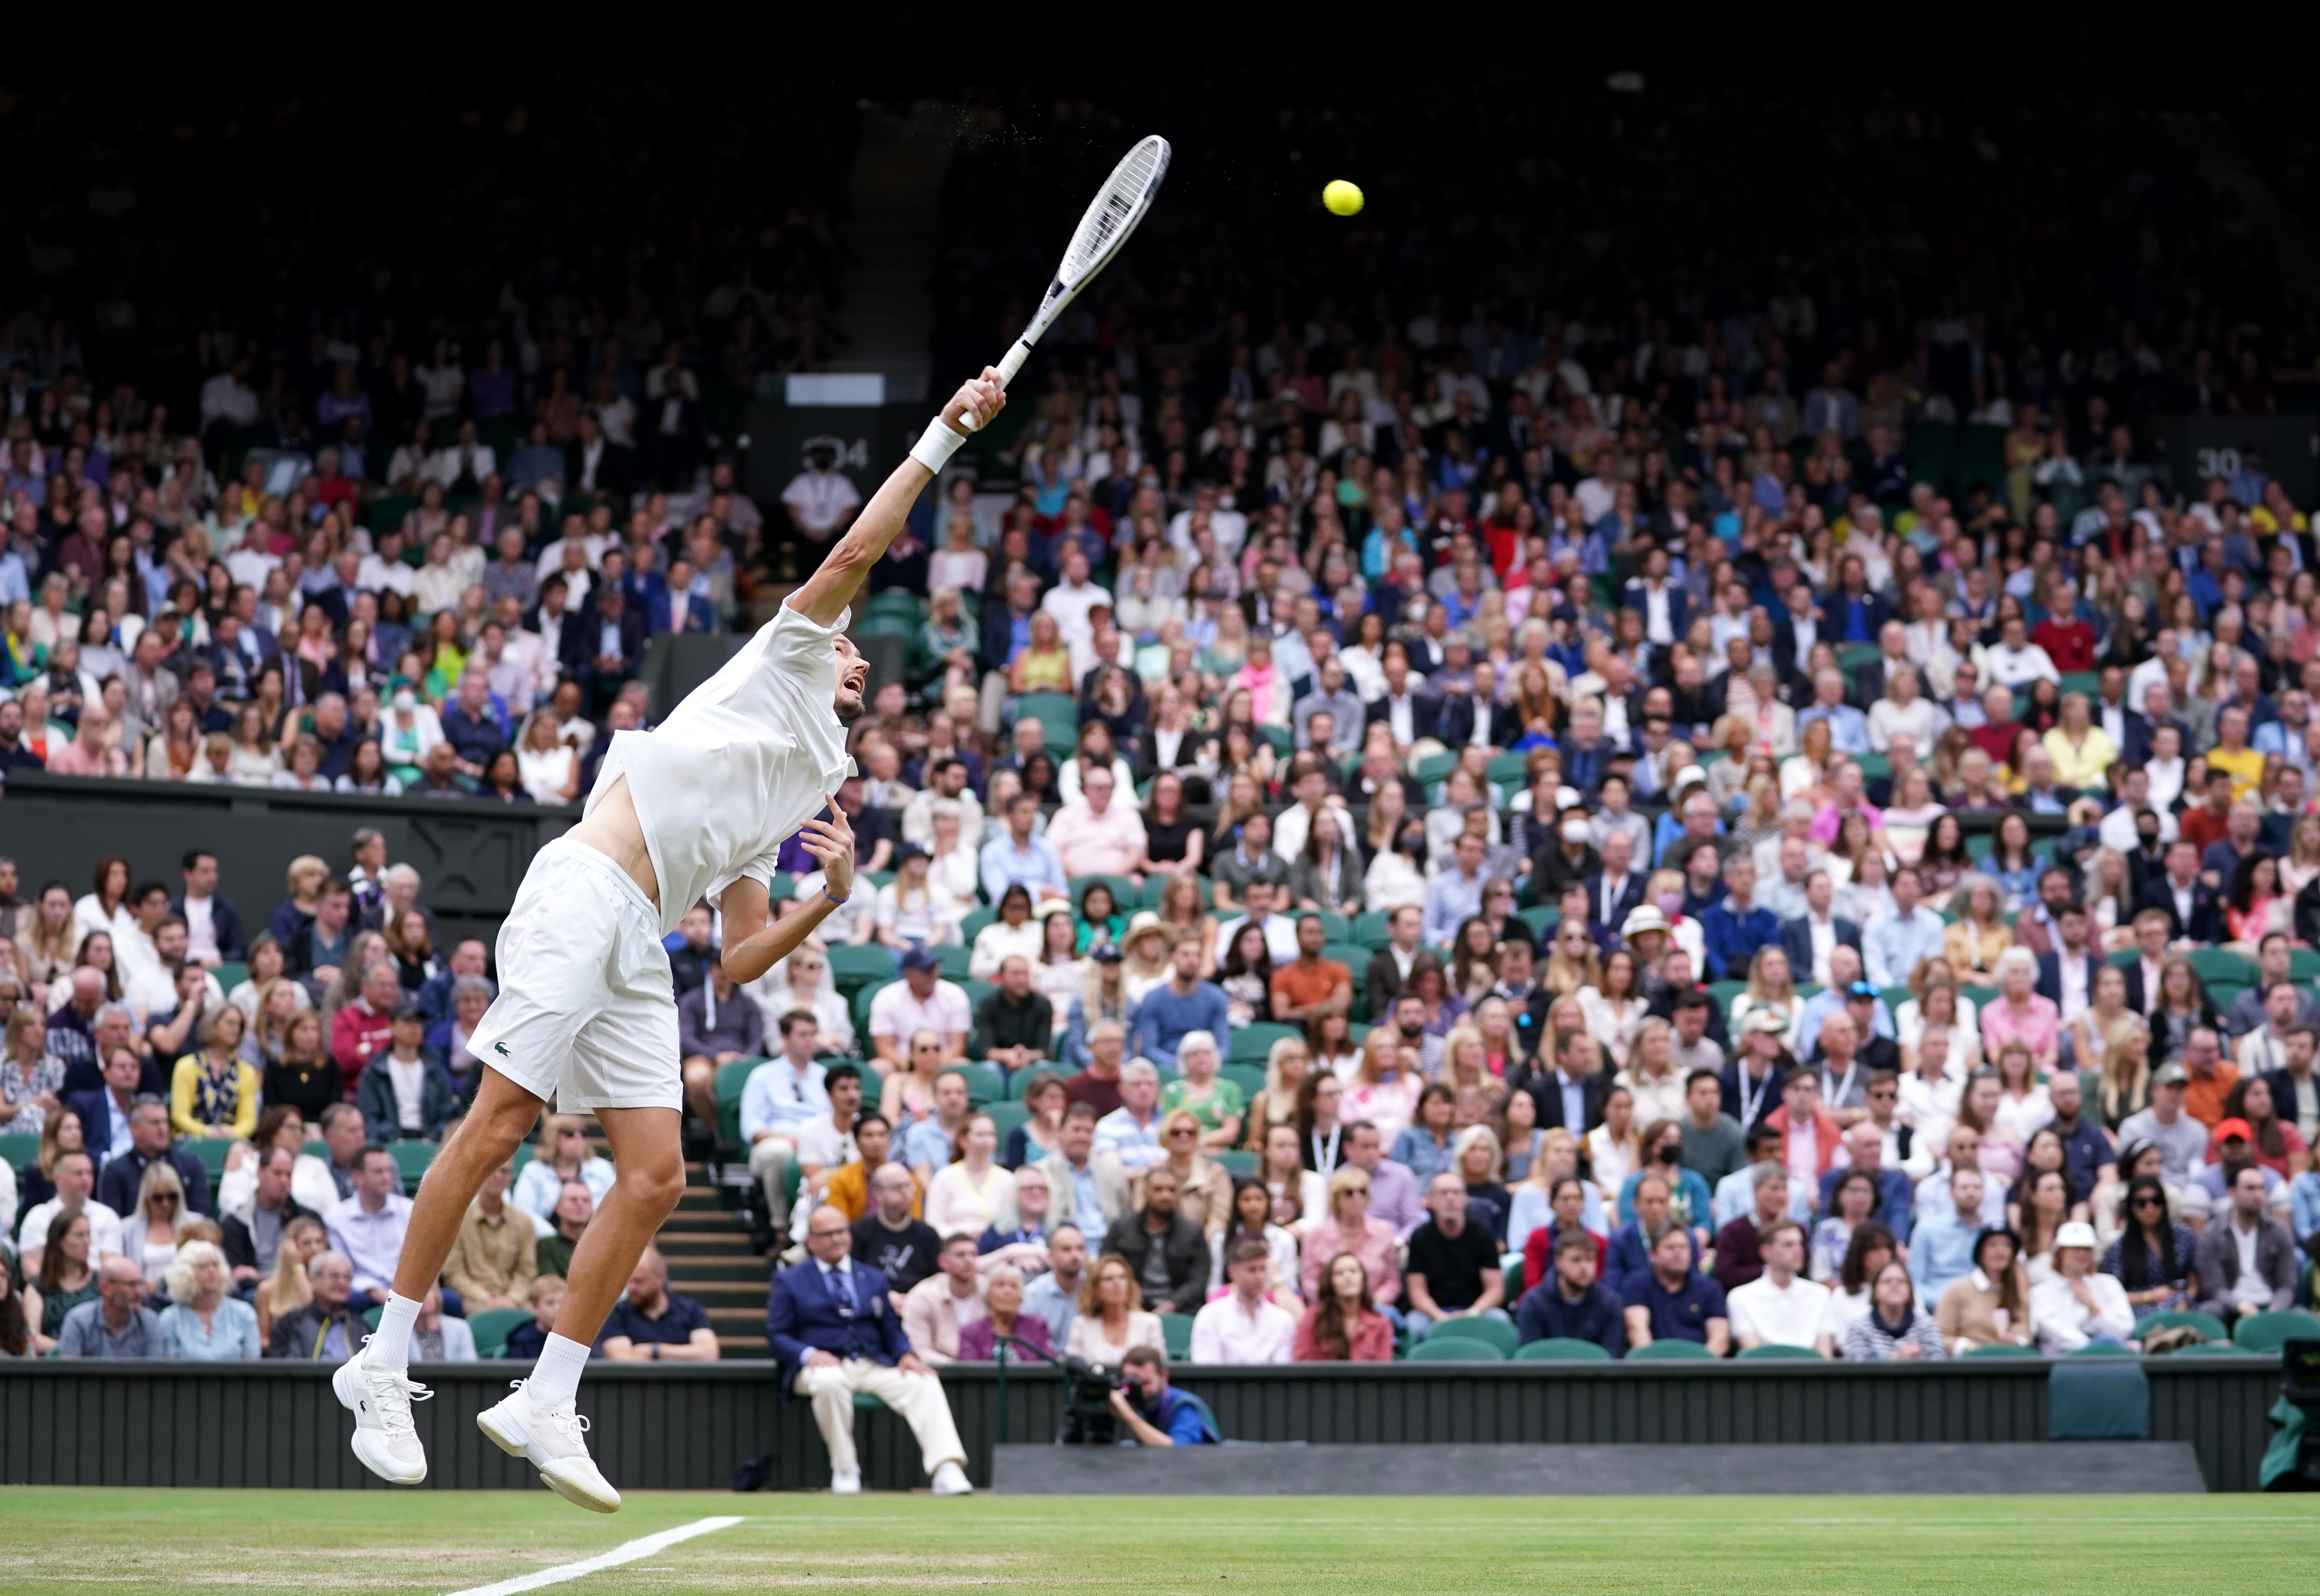 A capacity crowd was allowed into Wimbledon for the first time since the 2019 tournament but second seed Daniil Medvedev suffered a shock quarter-final defeat to Hubert Hurkacz